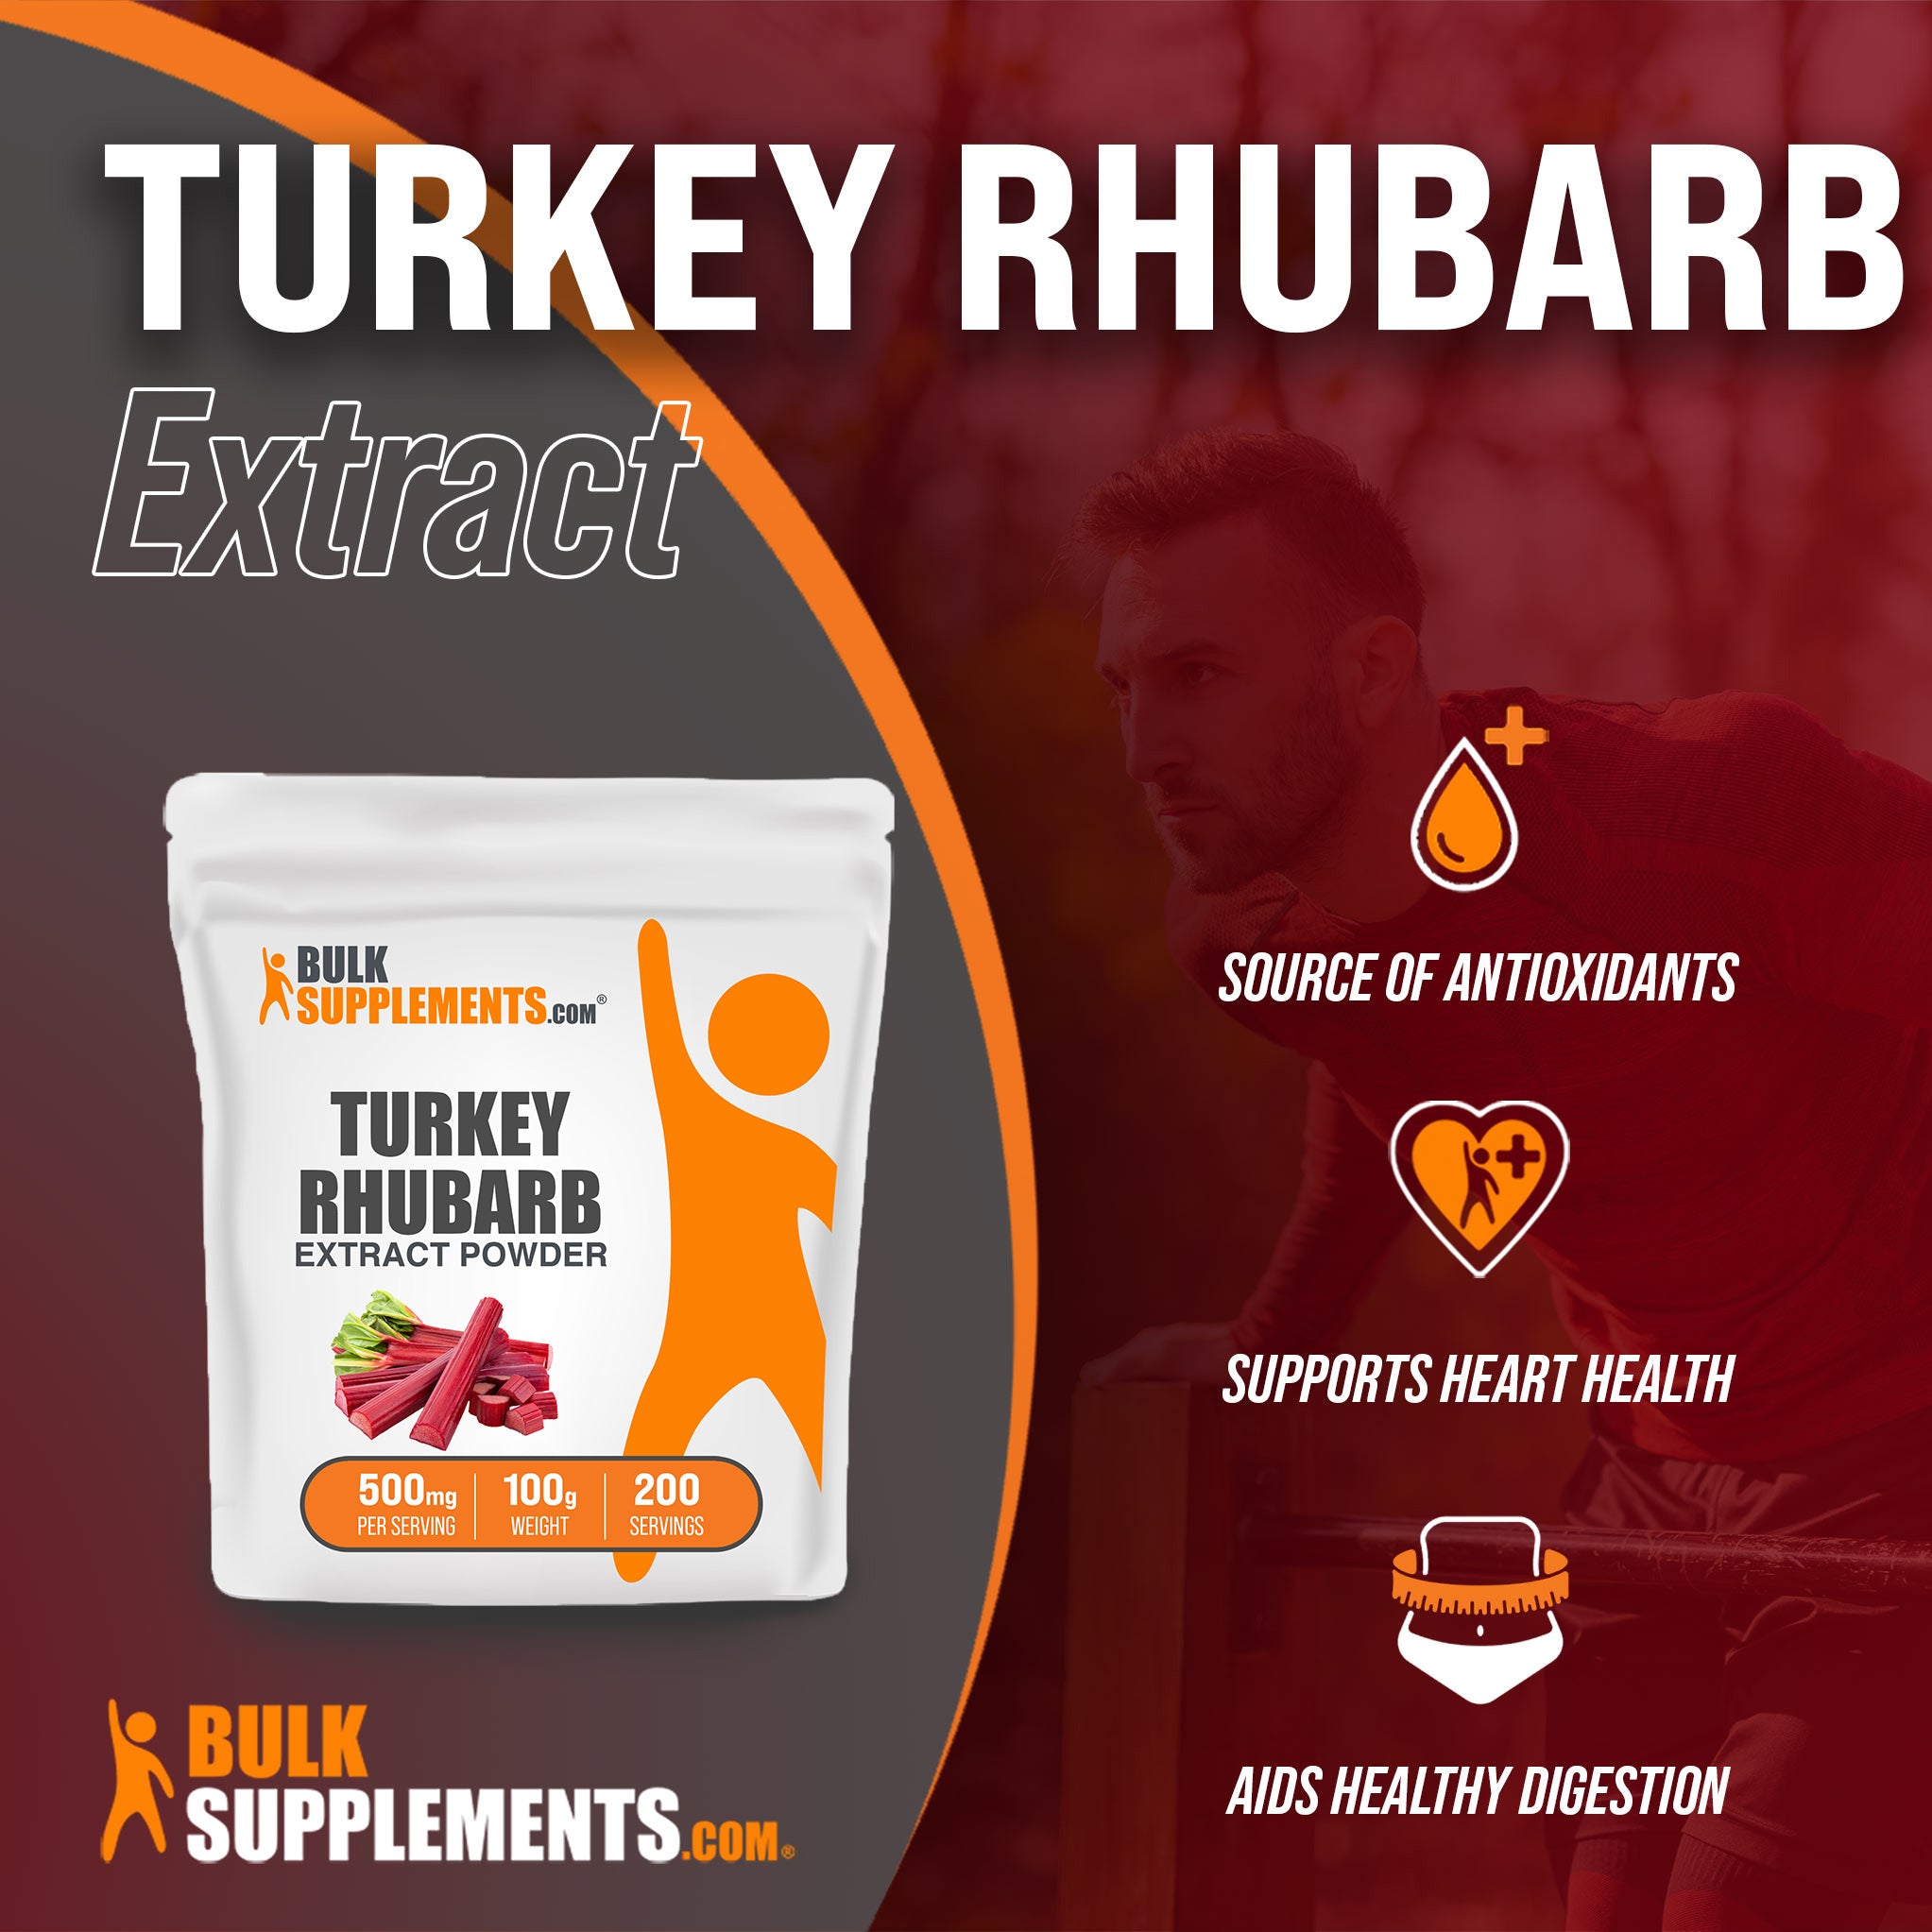 Benefits of Turkey Rhubarb Extract: source of antioxidants, supports heart health, aids healthy digestion